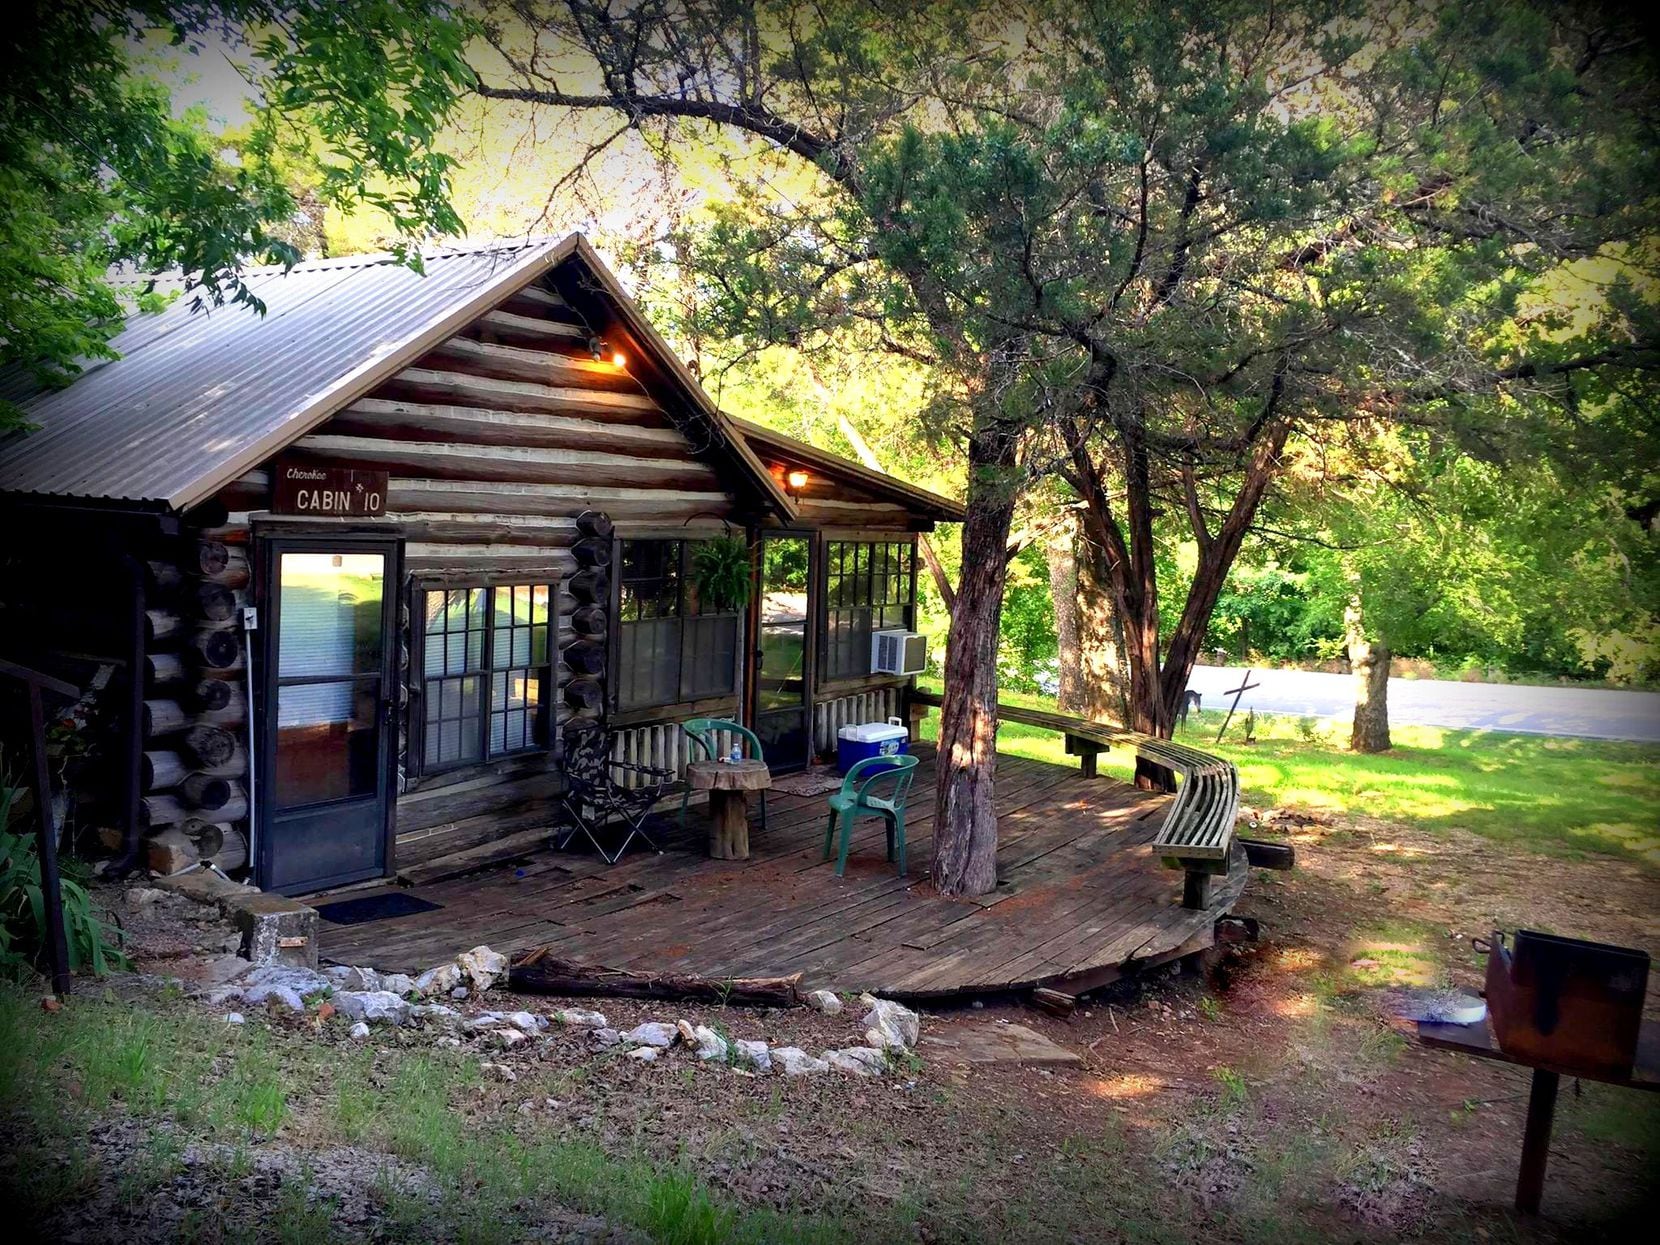 A stay at one of Cedarvale Mountainside Cabins’ 19 units offers an opportunity to explore...